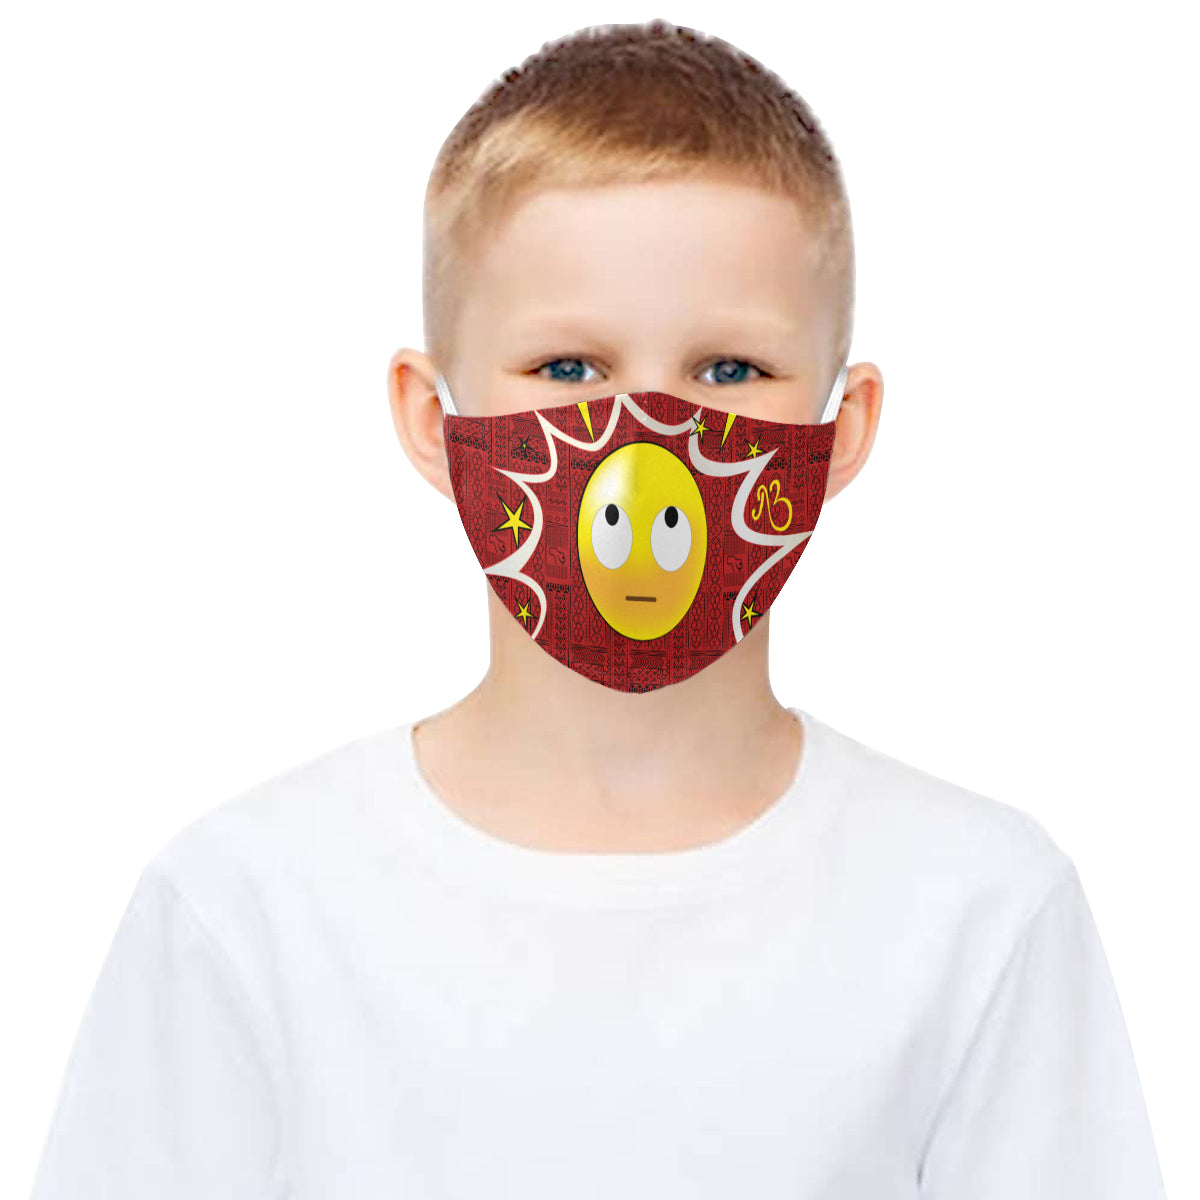 Yeah right! Tribal Print Comic Emoji Cotton Fabric Face Mask with Filter Slot and Adjustable Strap - Non-medical use (2 Filters Included)